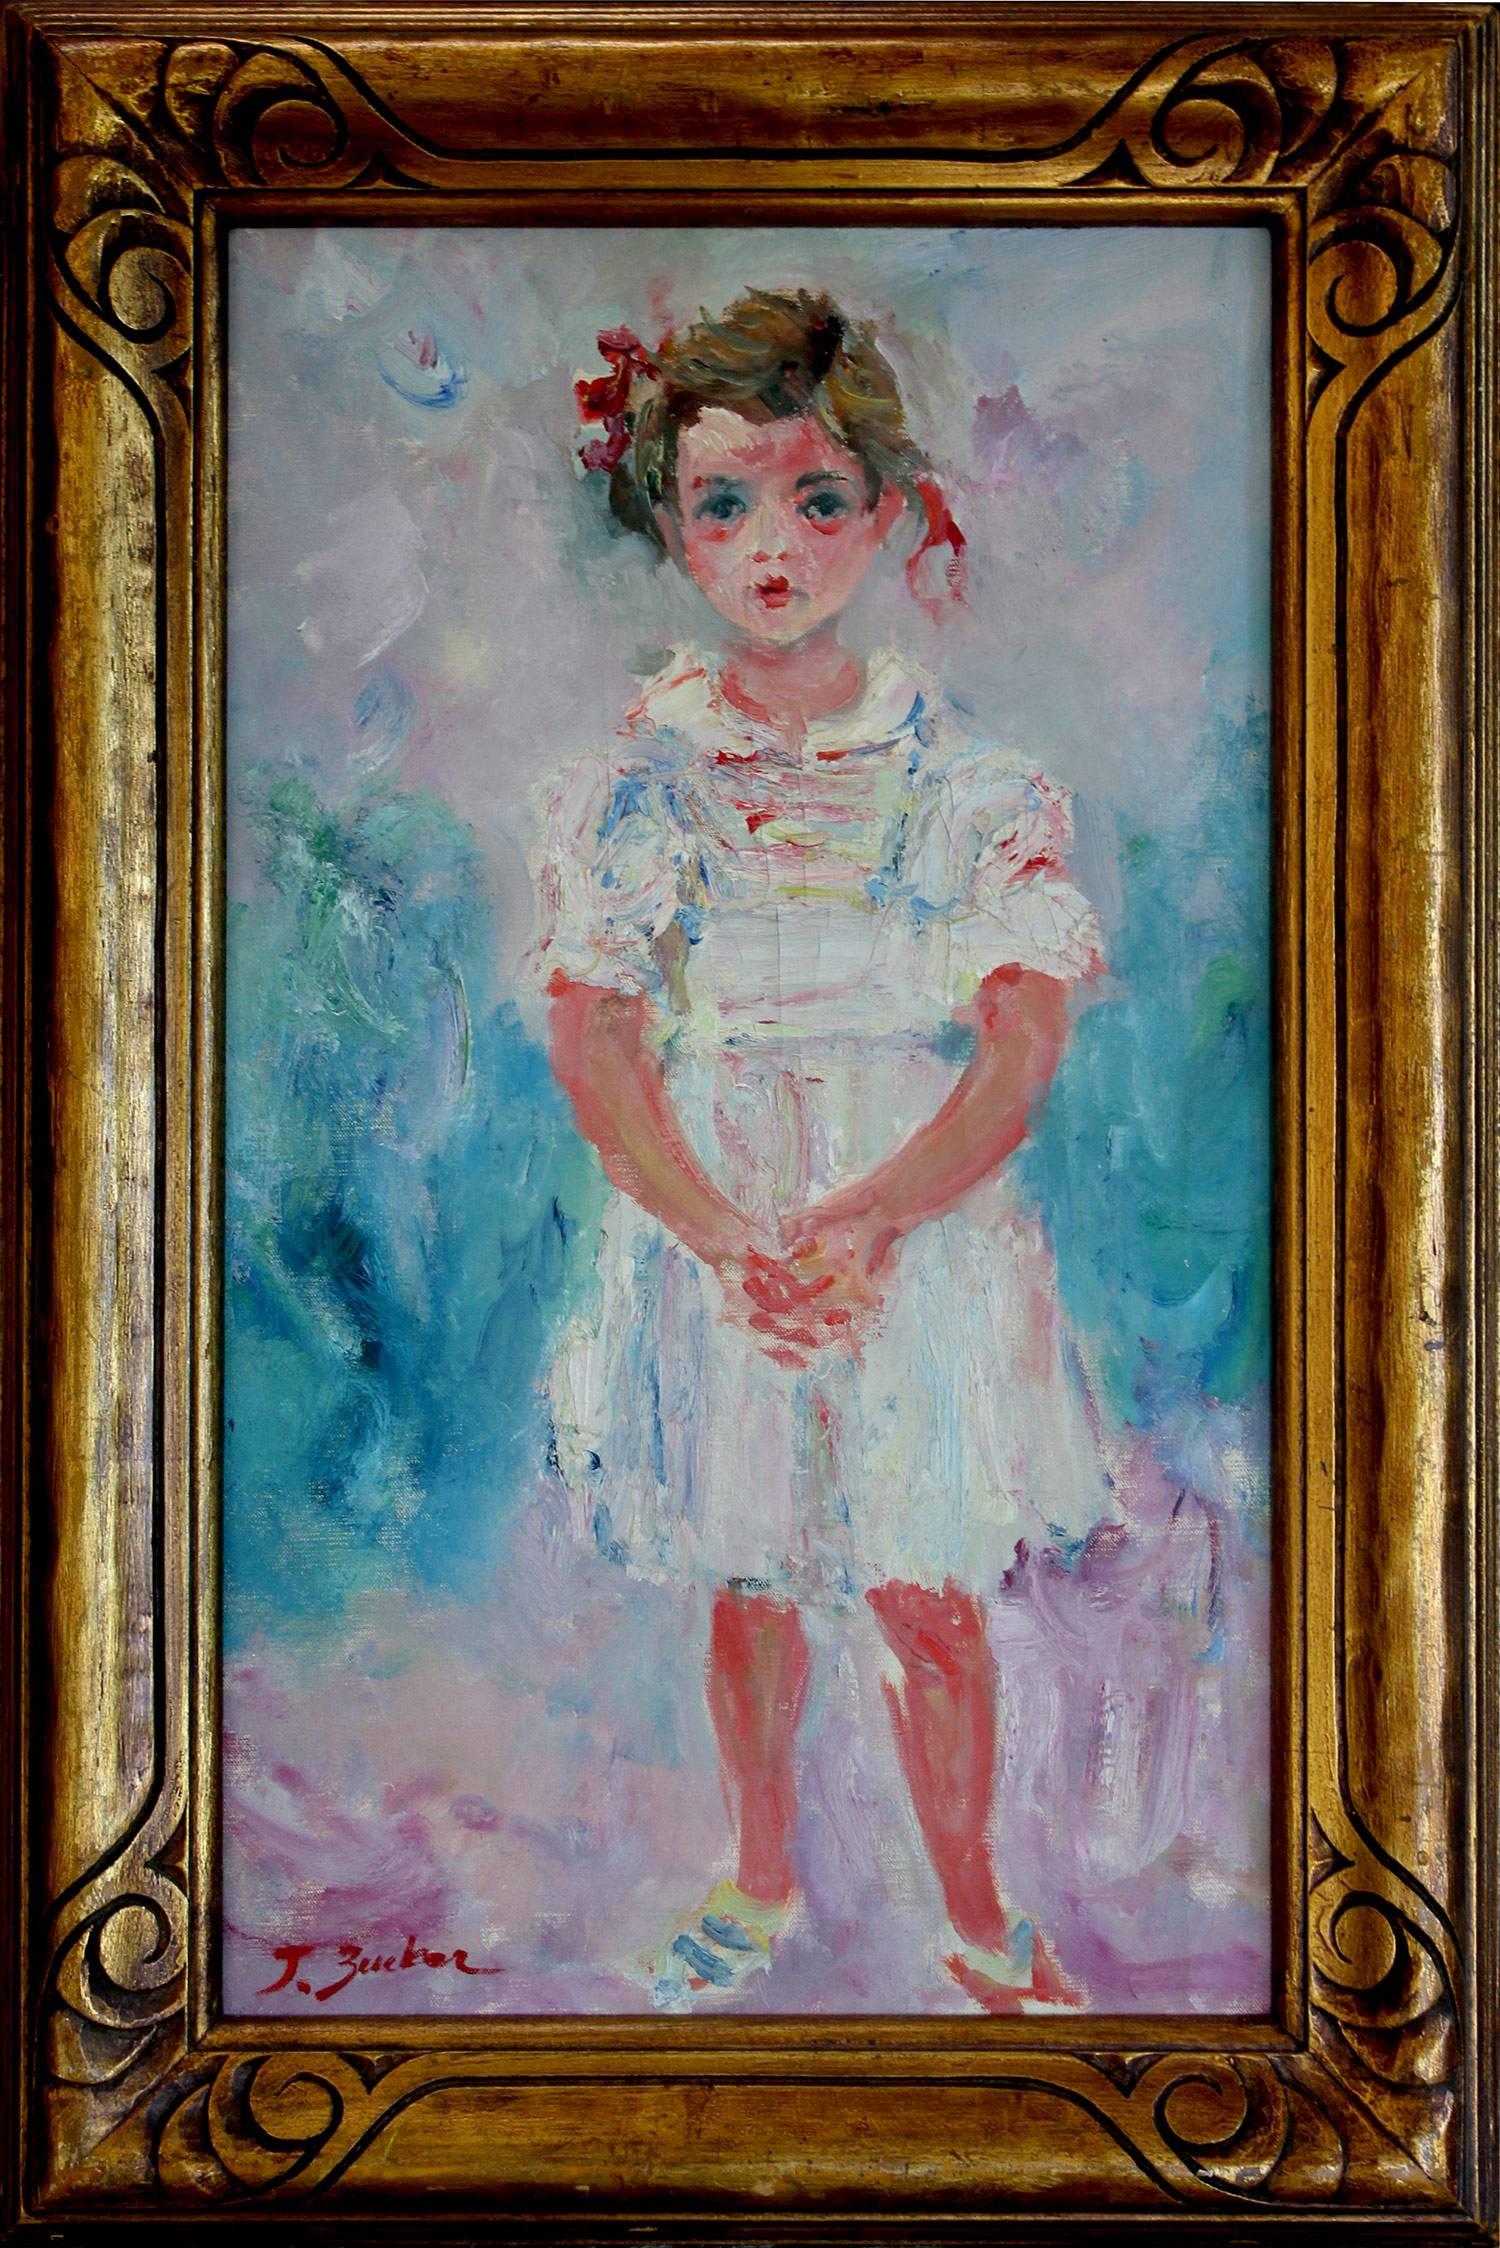 Jacques Zucker Figurative Painting - "Little Girl in White Dress" Impressionist Girl Portrait Oil Painting on Canvas